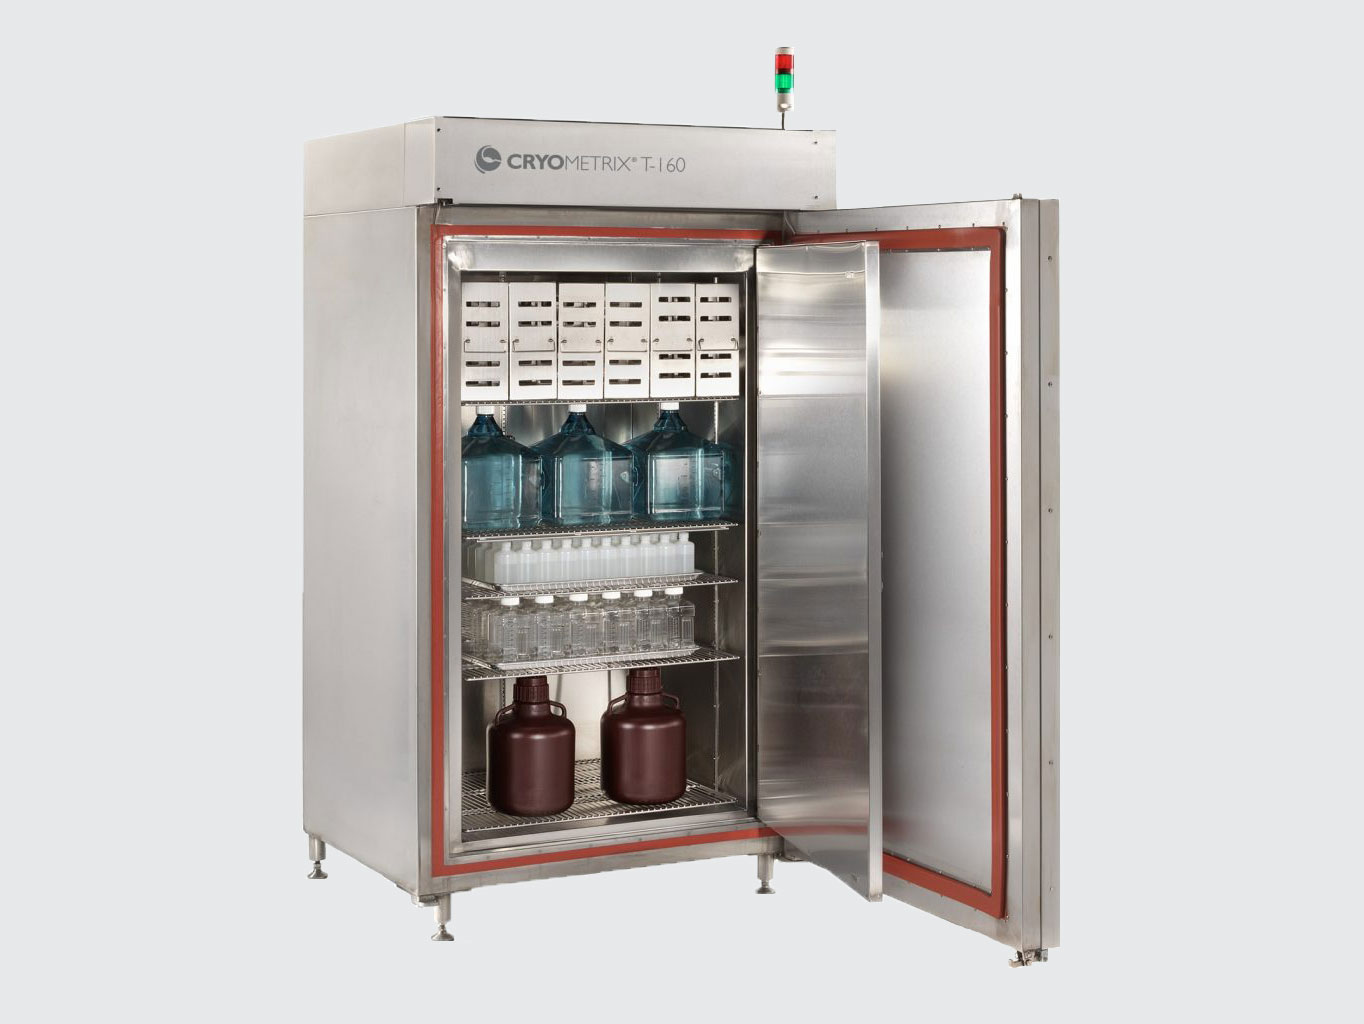 Ultra‐low temperature freezer offers an alternative to traditional cryovats